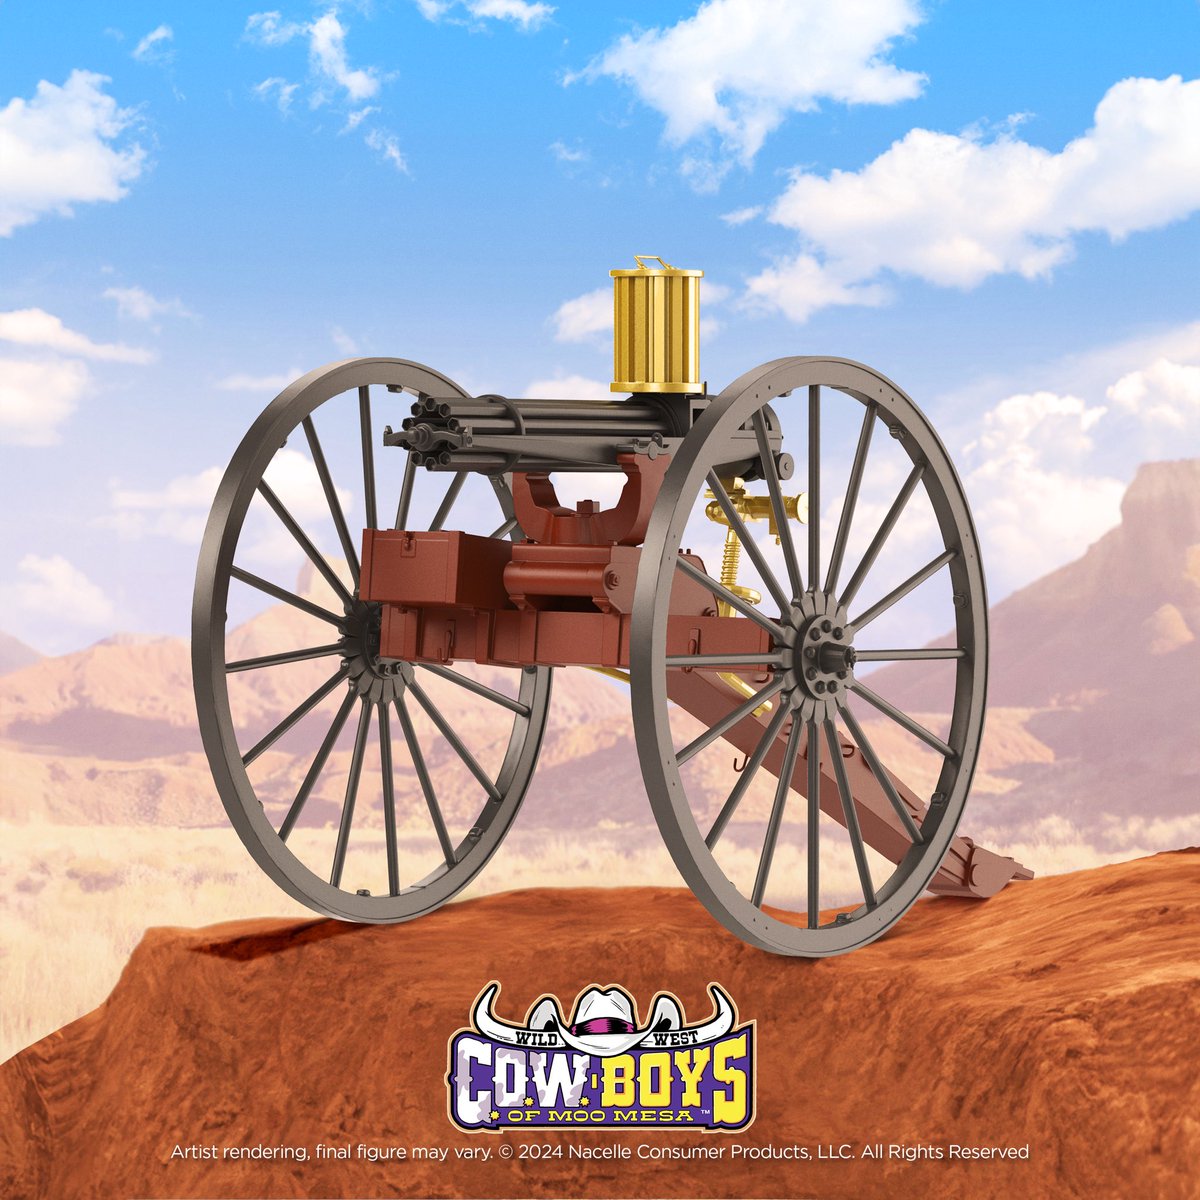 Locked, Loaded & Unstoppa-Bull… Stay tuned tomorrow for more sneak peeks of our upcoming Wild West C.O.W.-Boys of Moo Mesa action figures that drop for pre-order April 23 on NacelleStore.com. #nacelle #actionfigures #cowboysofmoomesa #gatlinggun